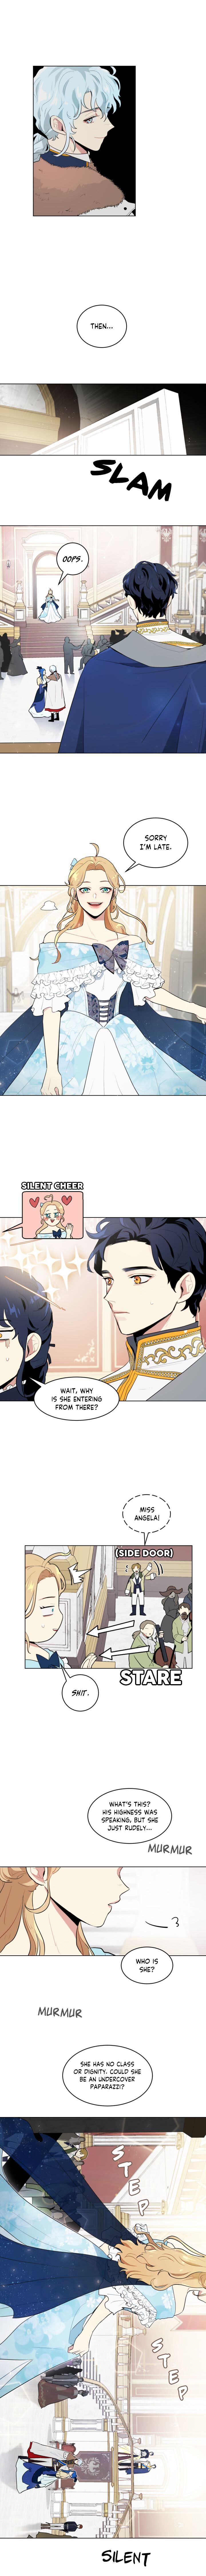 I'm Stanning the Prince Chapter 019 page 4